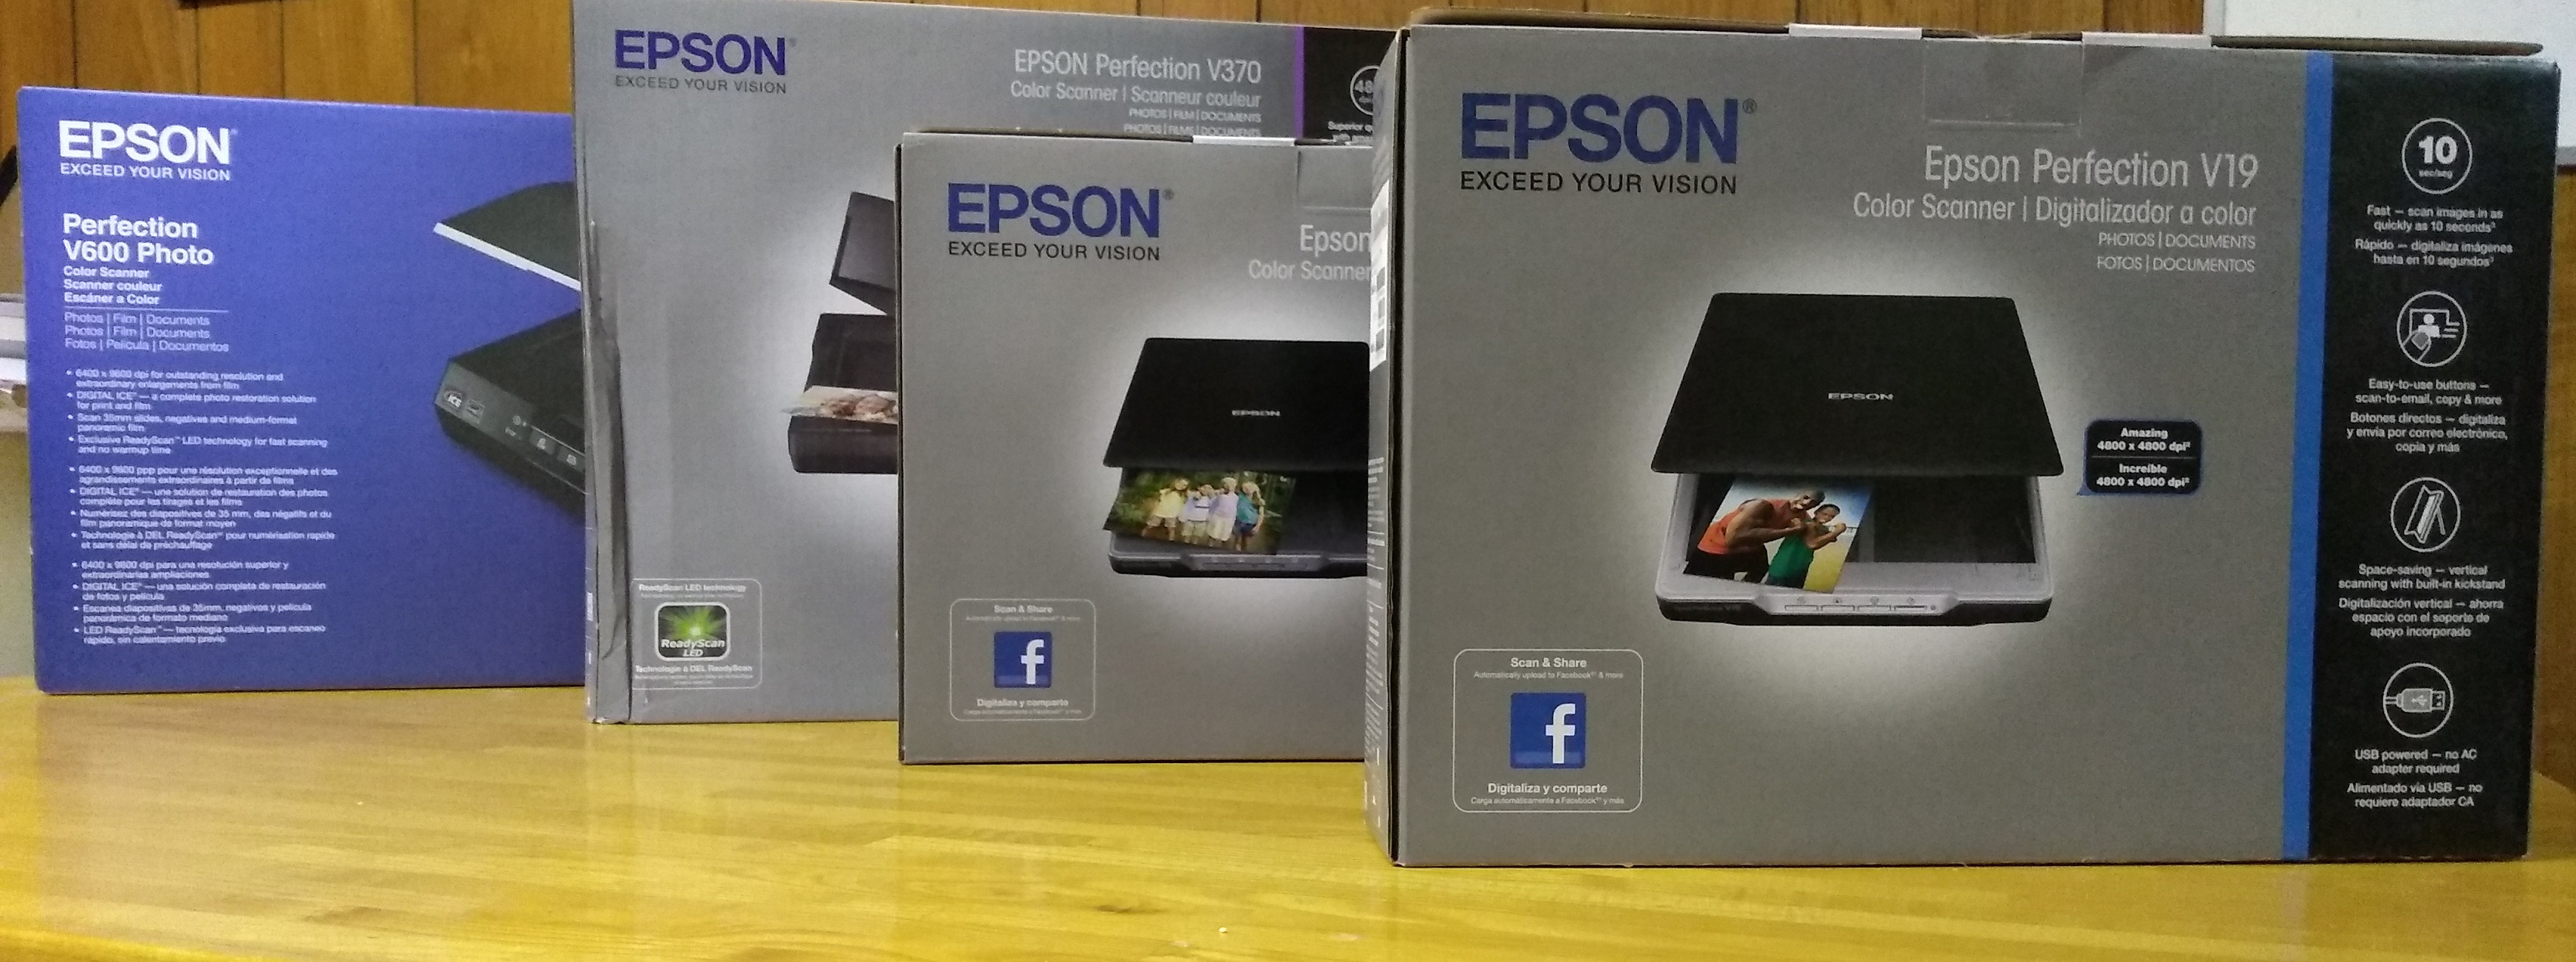 Epson Perfection V 600 Photo Scanner Flatbed/lit plat : :  High-tech